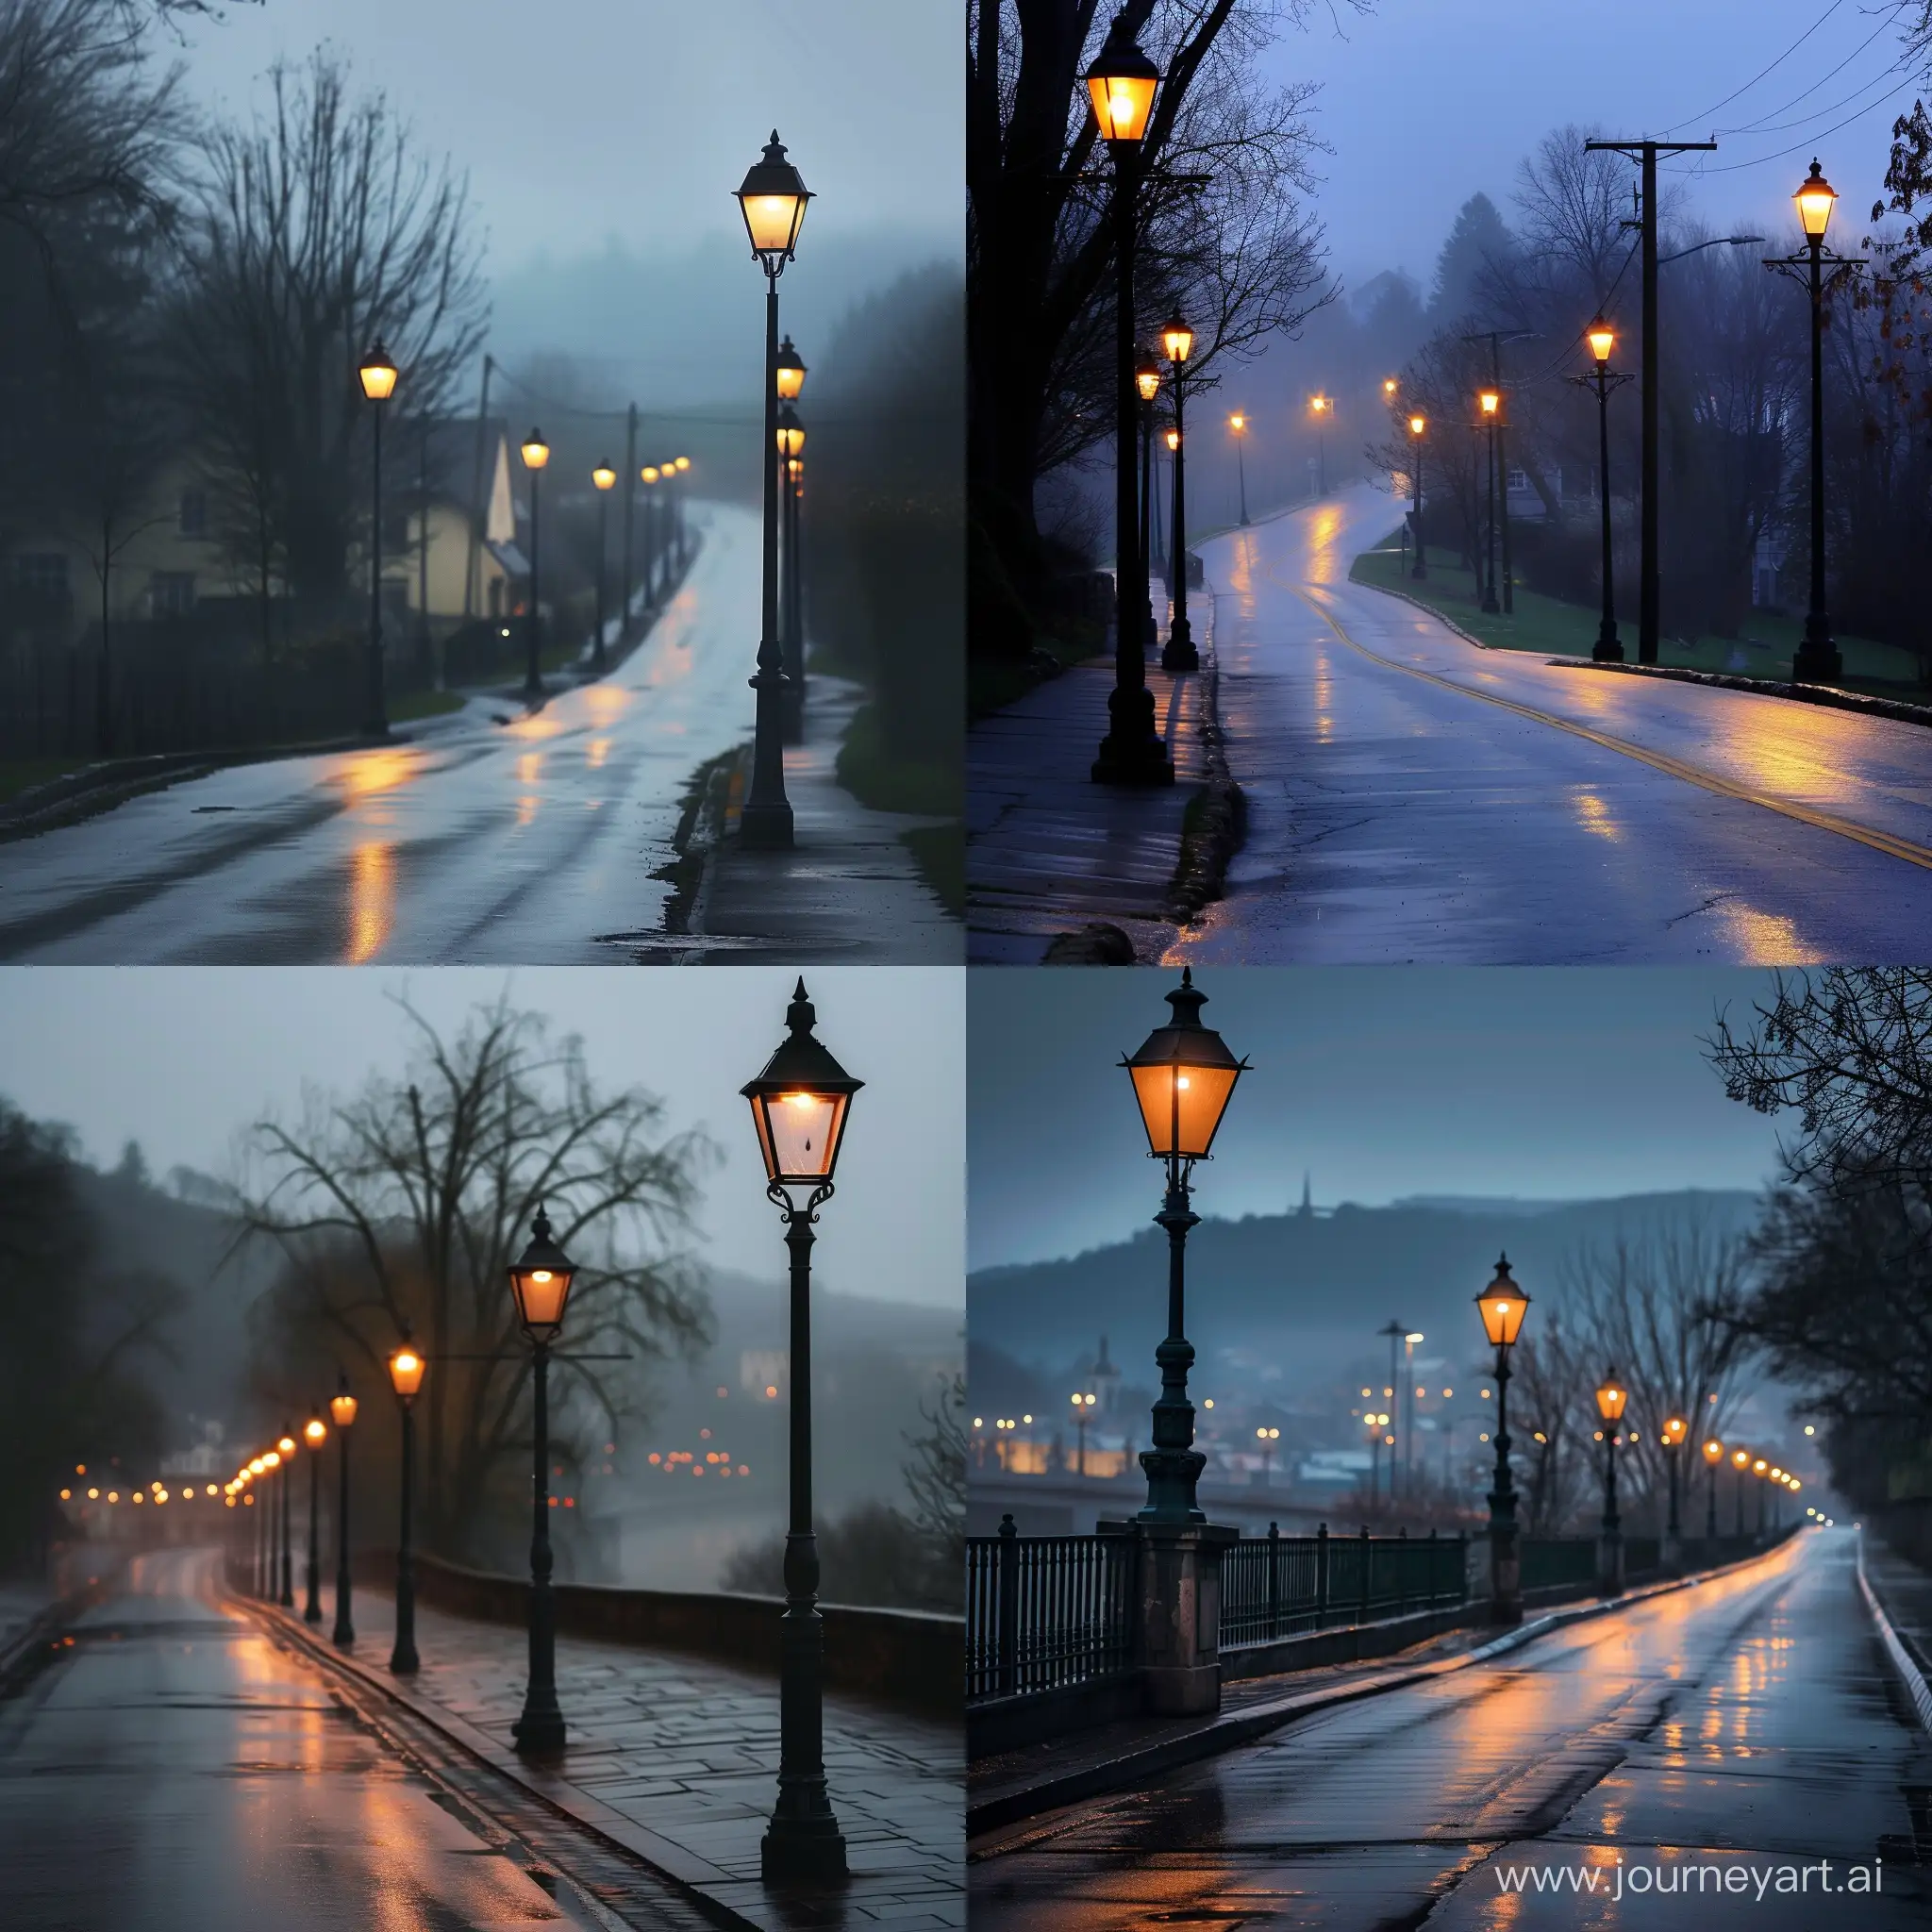 Quiet-Morning-in-Rainy-Town-Serene-Street-Lamps-and-Wet-Roads